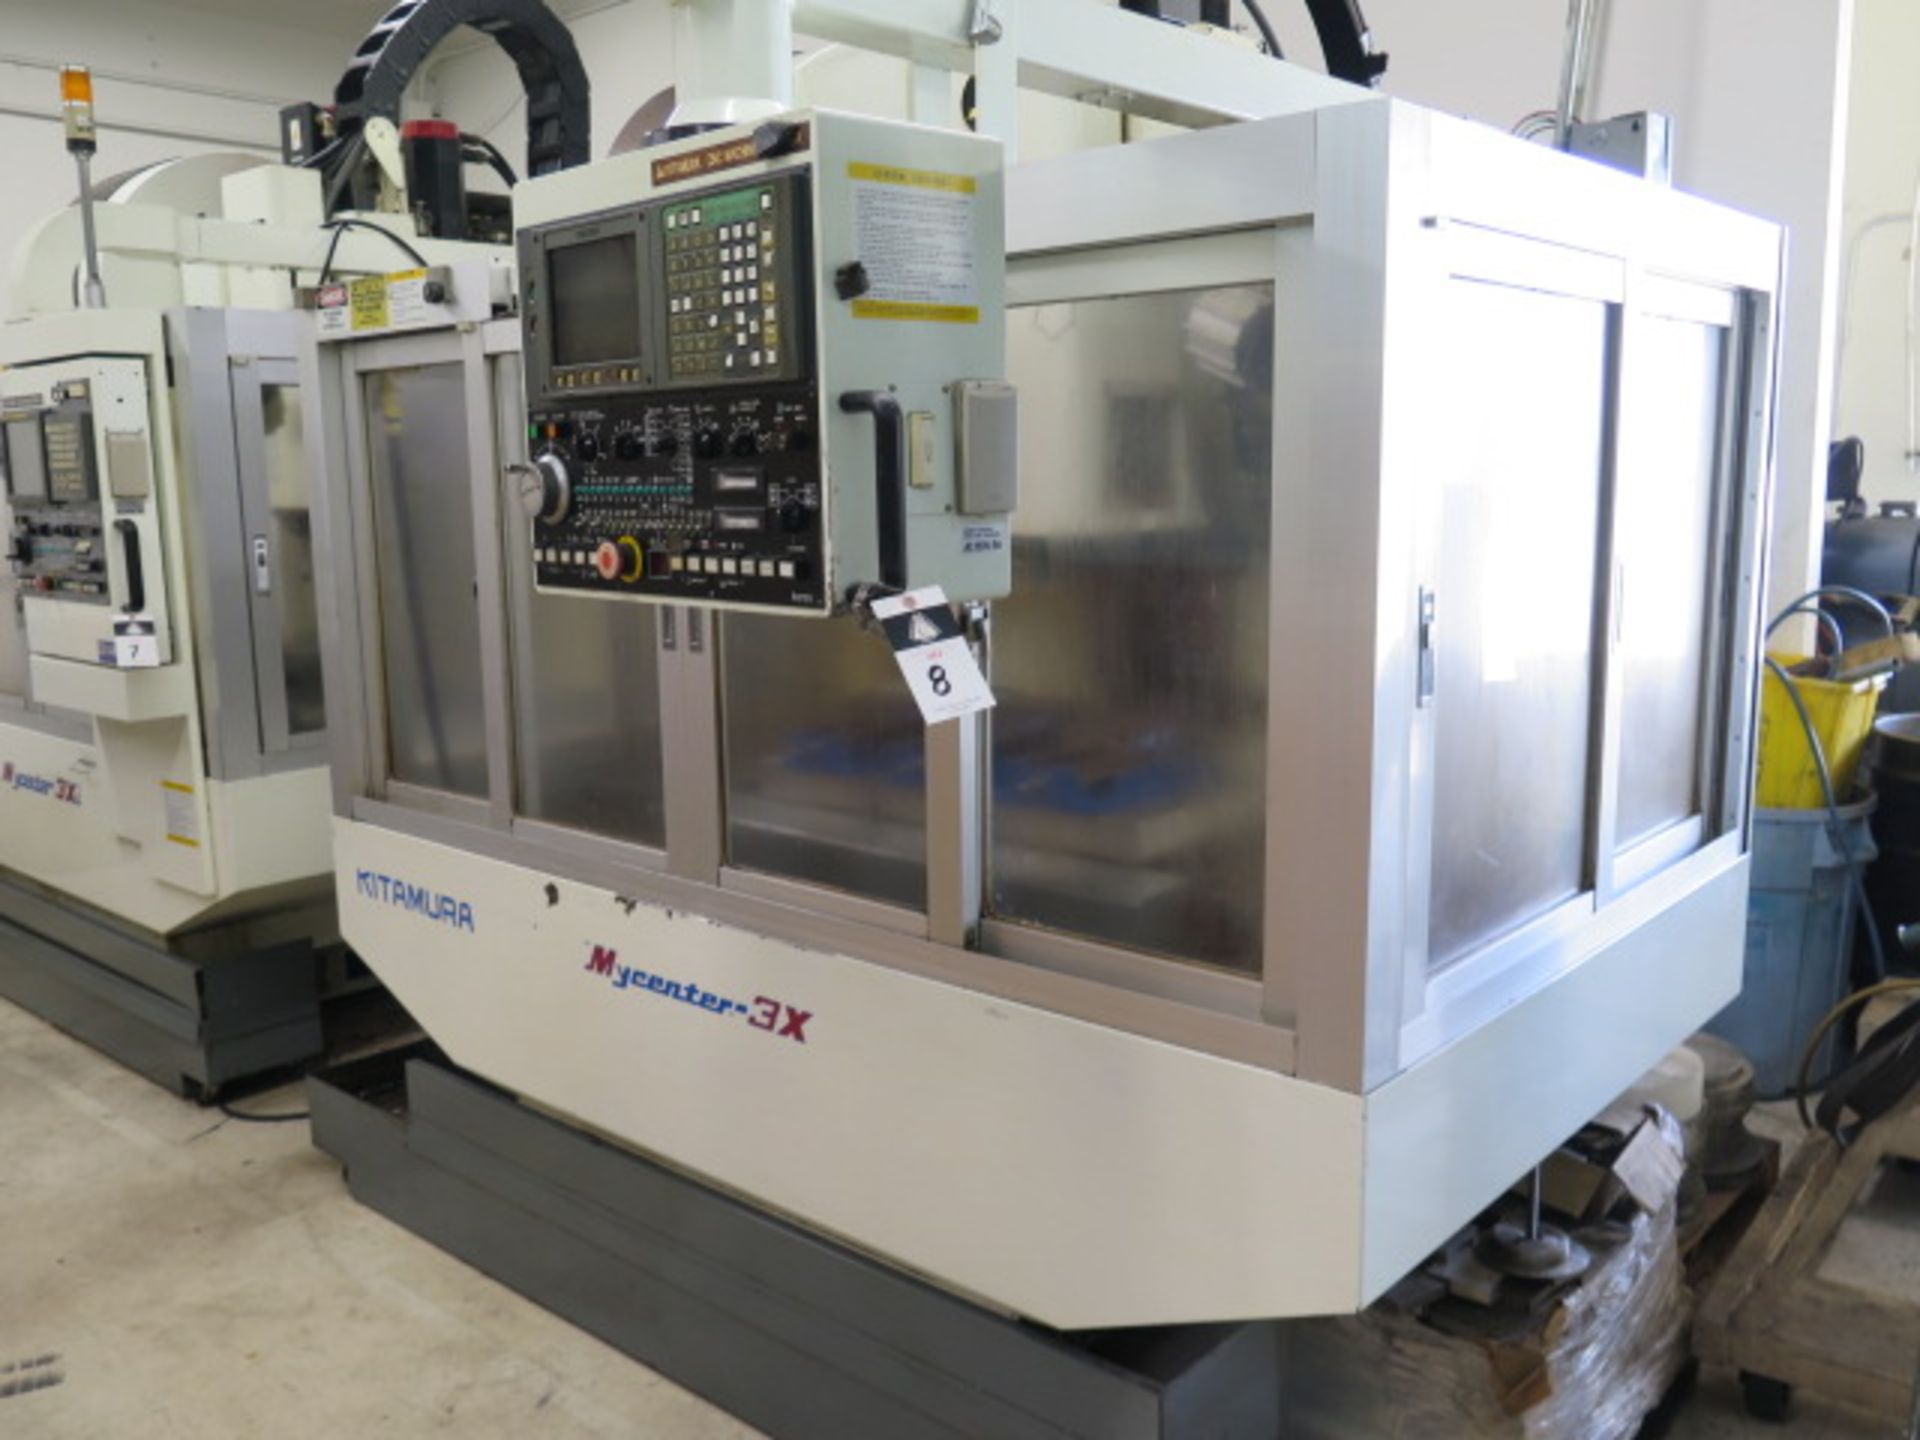 Kitamura Mycenter-3x CNC VMC s/n 11710 w/ Yasnac Controls, 24-Station STC, SOLD AS IS - Image 2 of 13